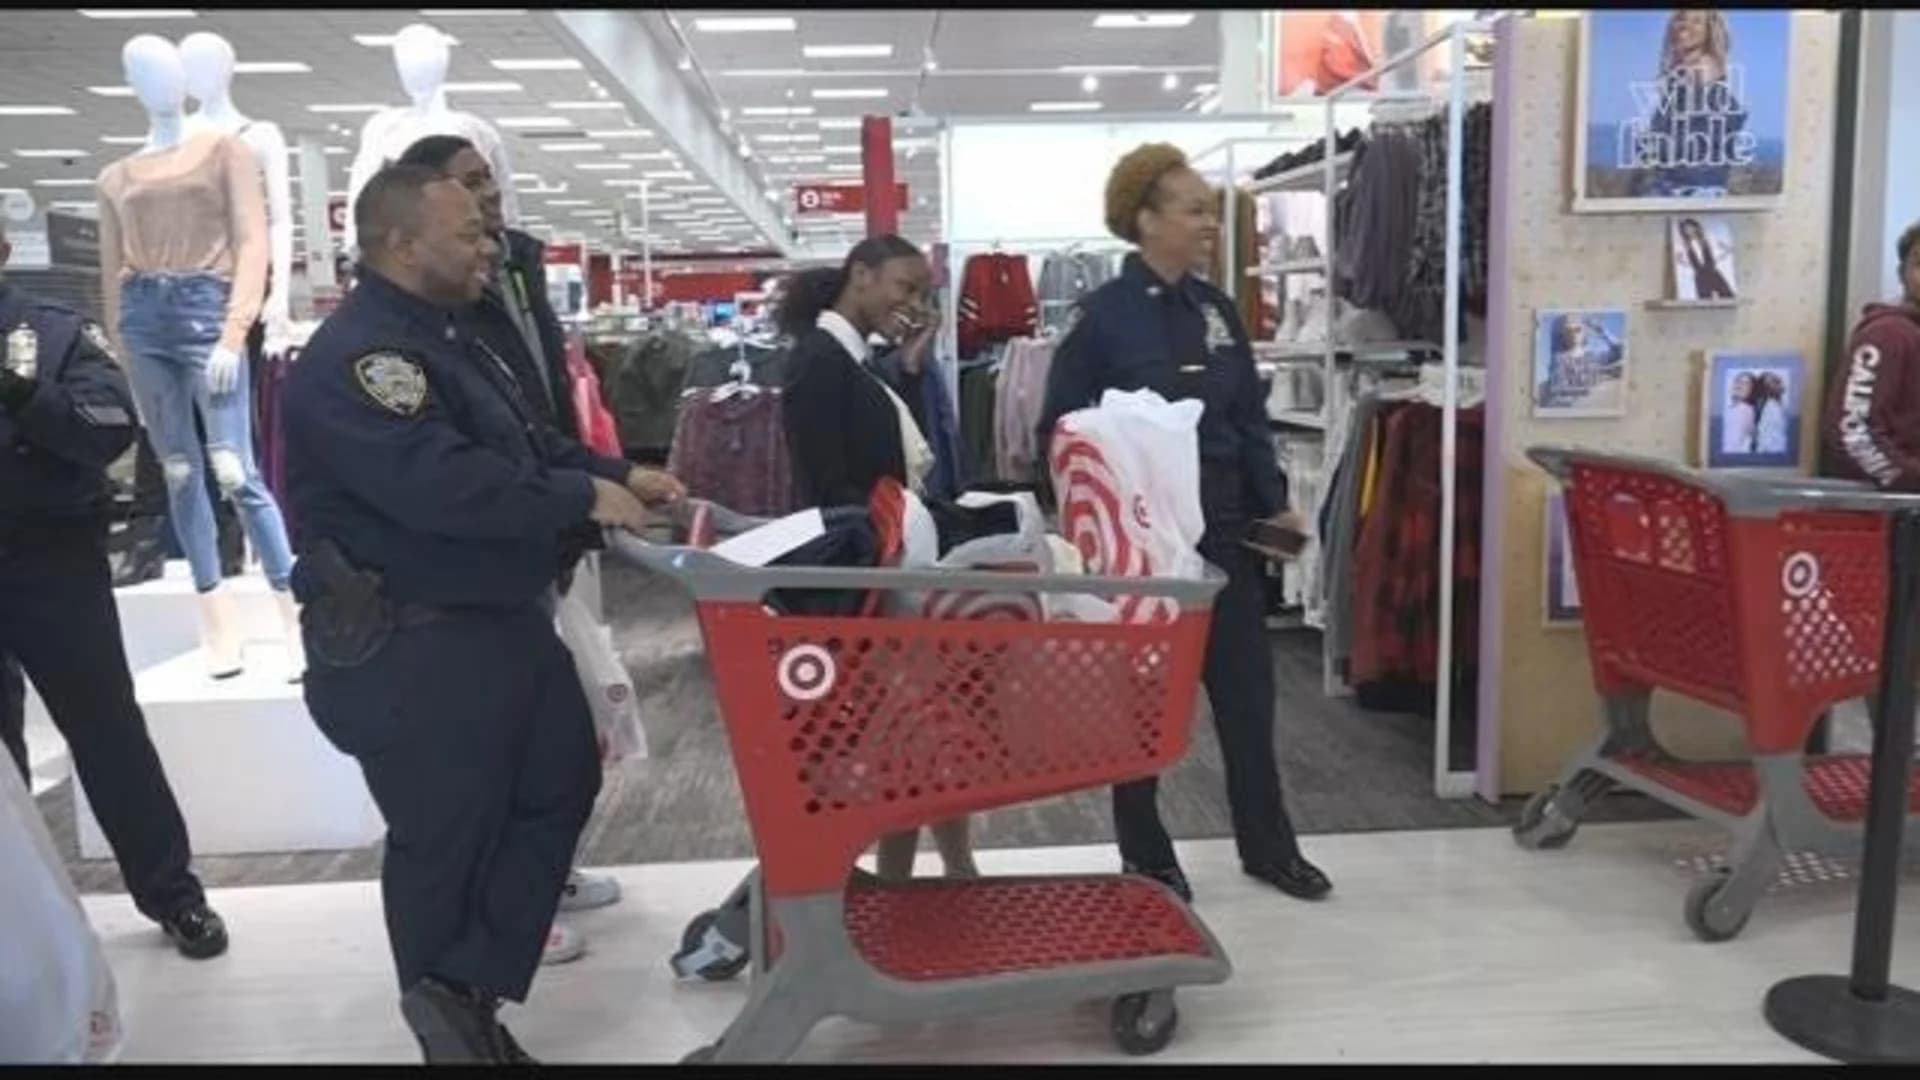 NYPD Explorers receive surprise shopping spree worth $200